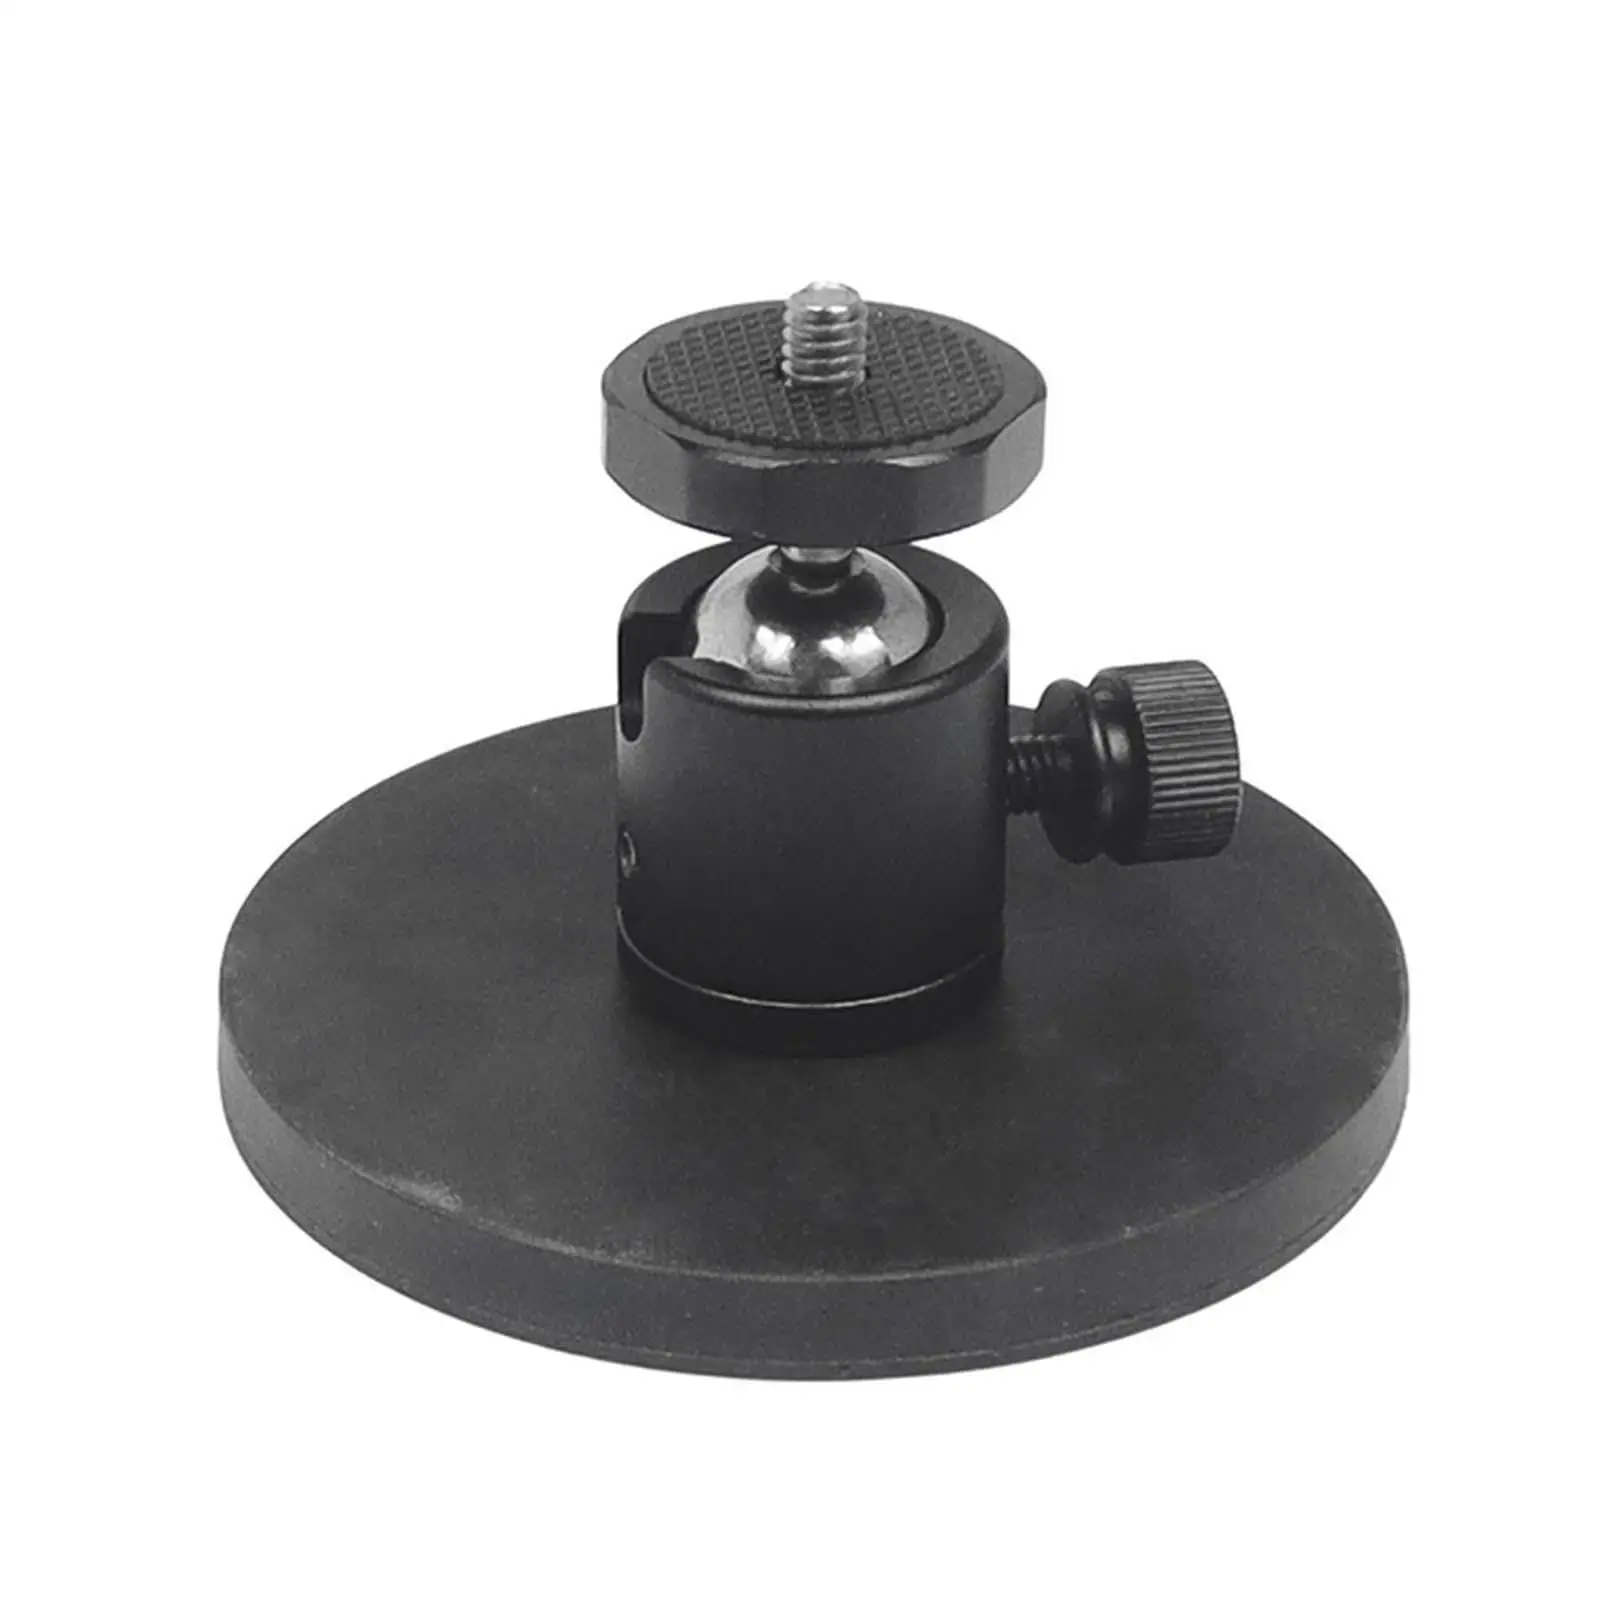 3.5inch Magnetic Camera Mounts Base with Ball Head, for Smart Phone Accessories 1/4 Screw Threaded High Performance Durable